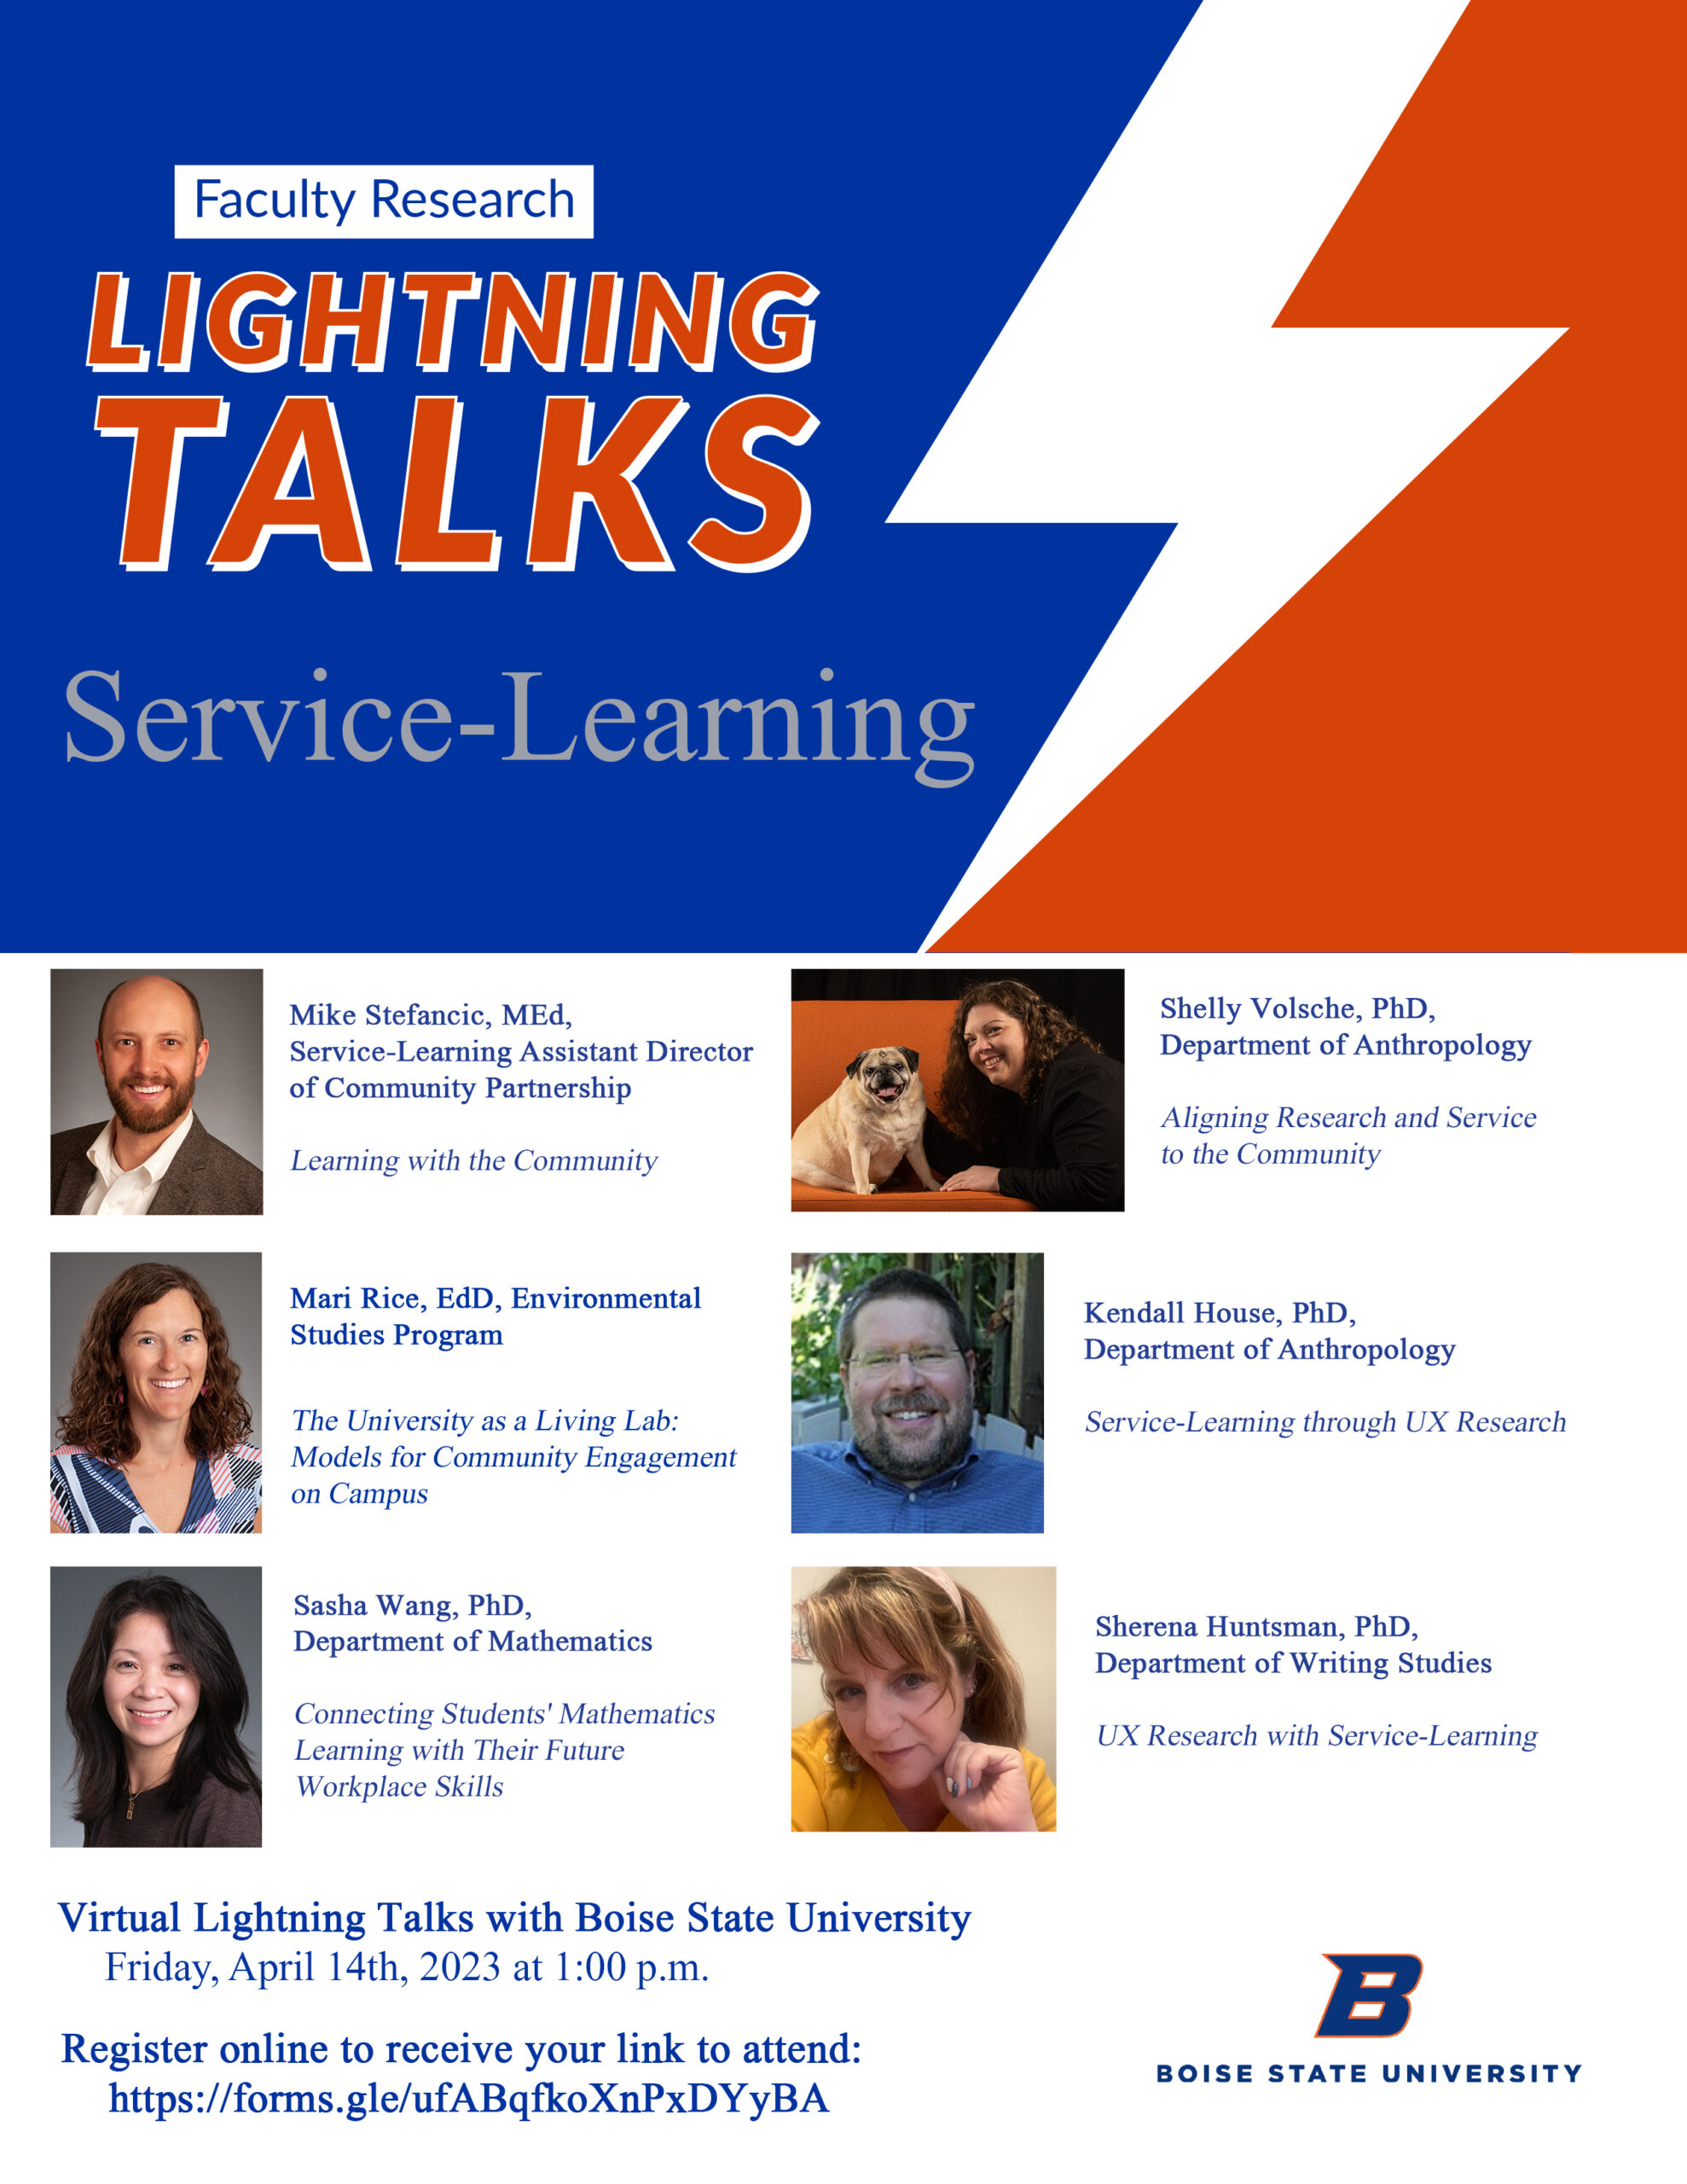 Flyer with Lightning talk information. Pictures of each presenter and titles